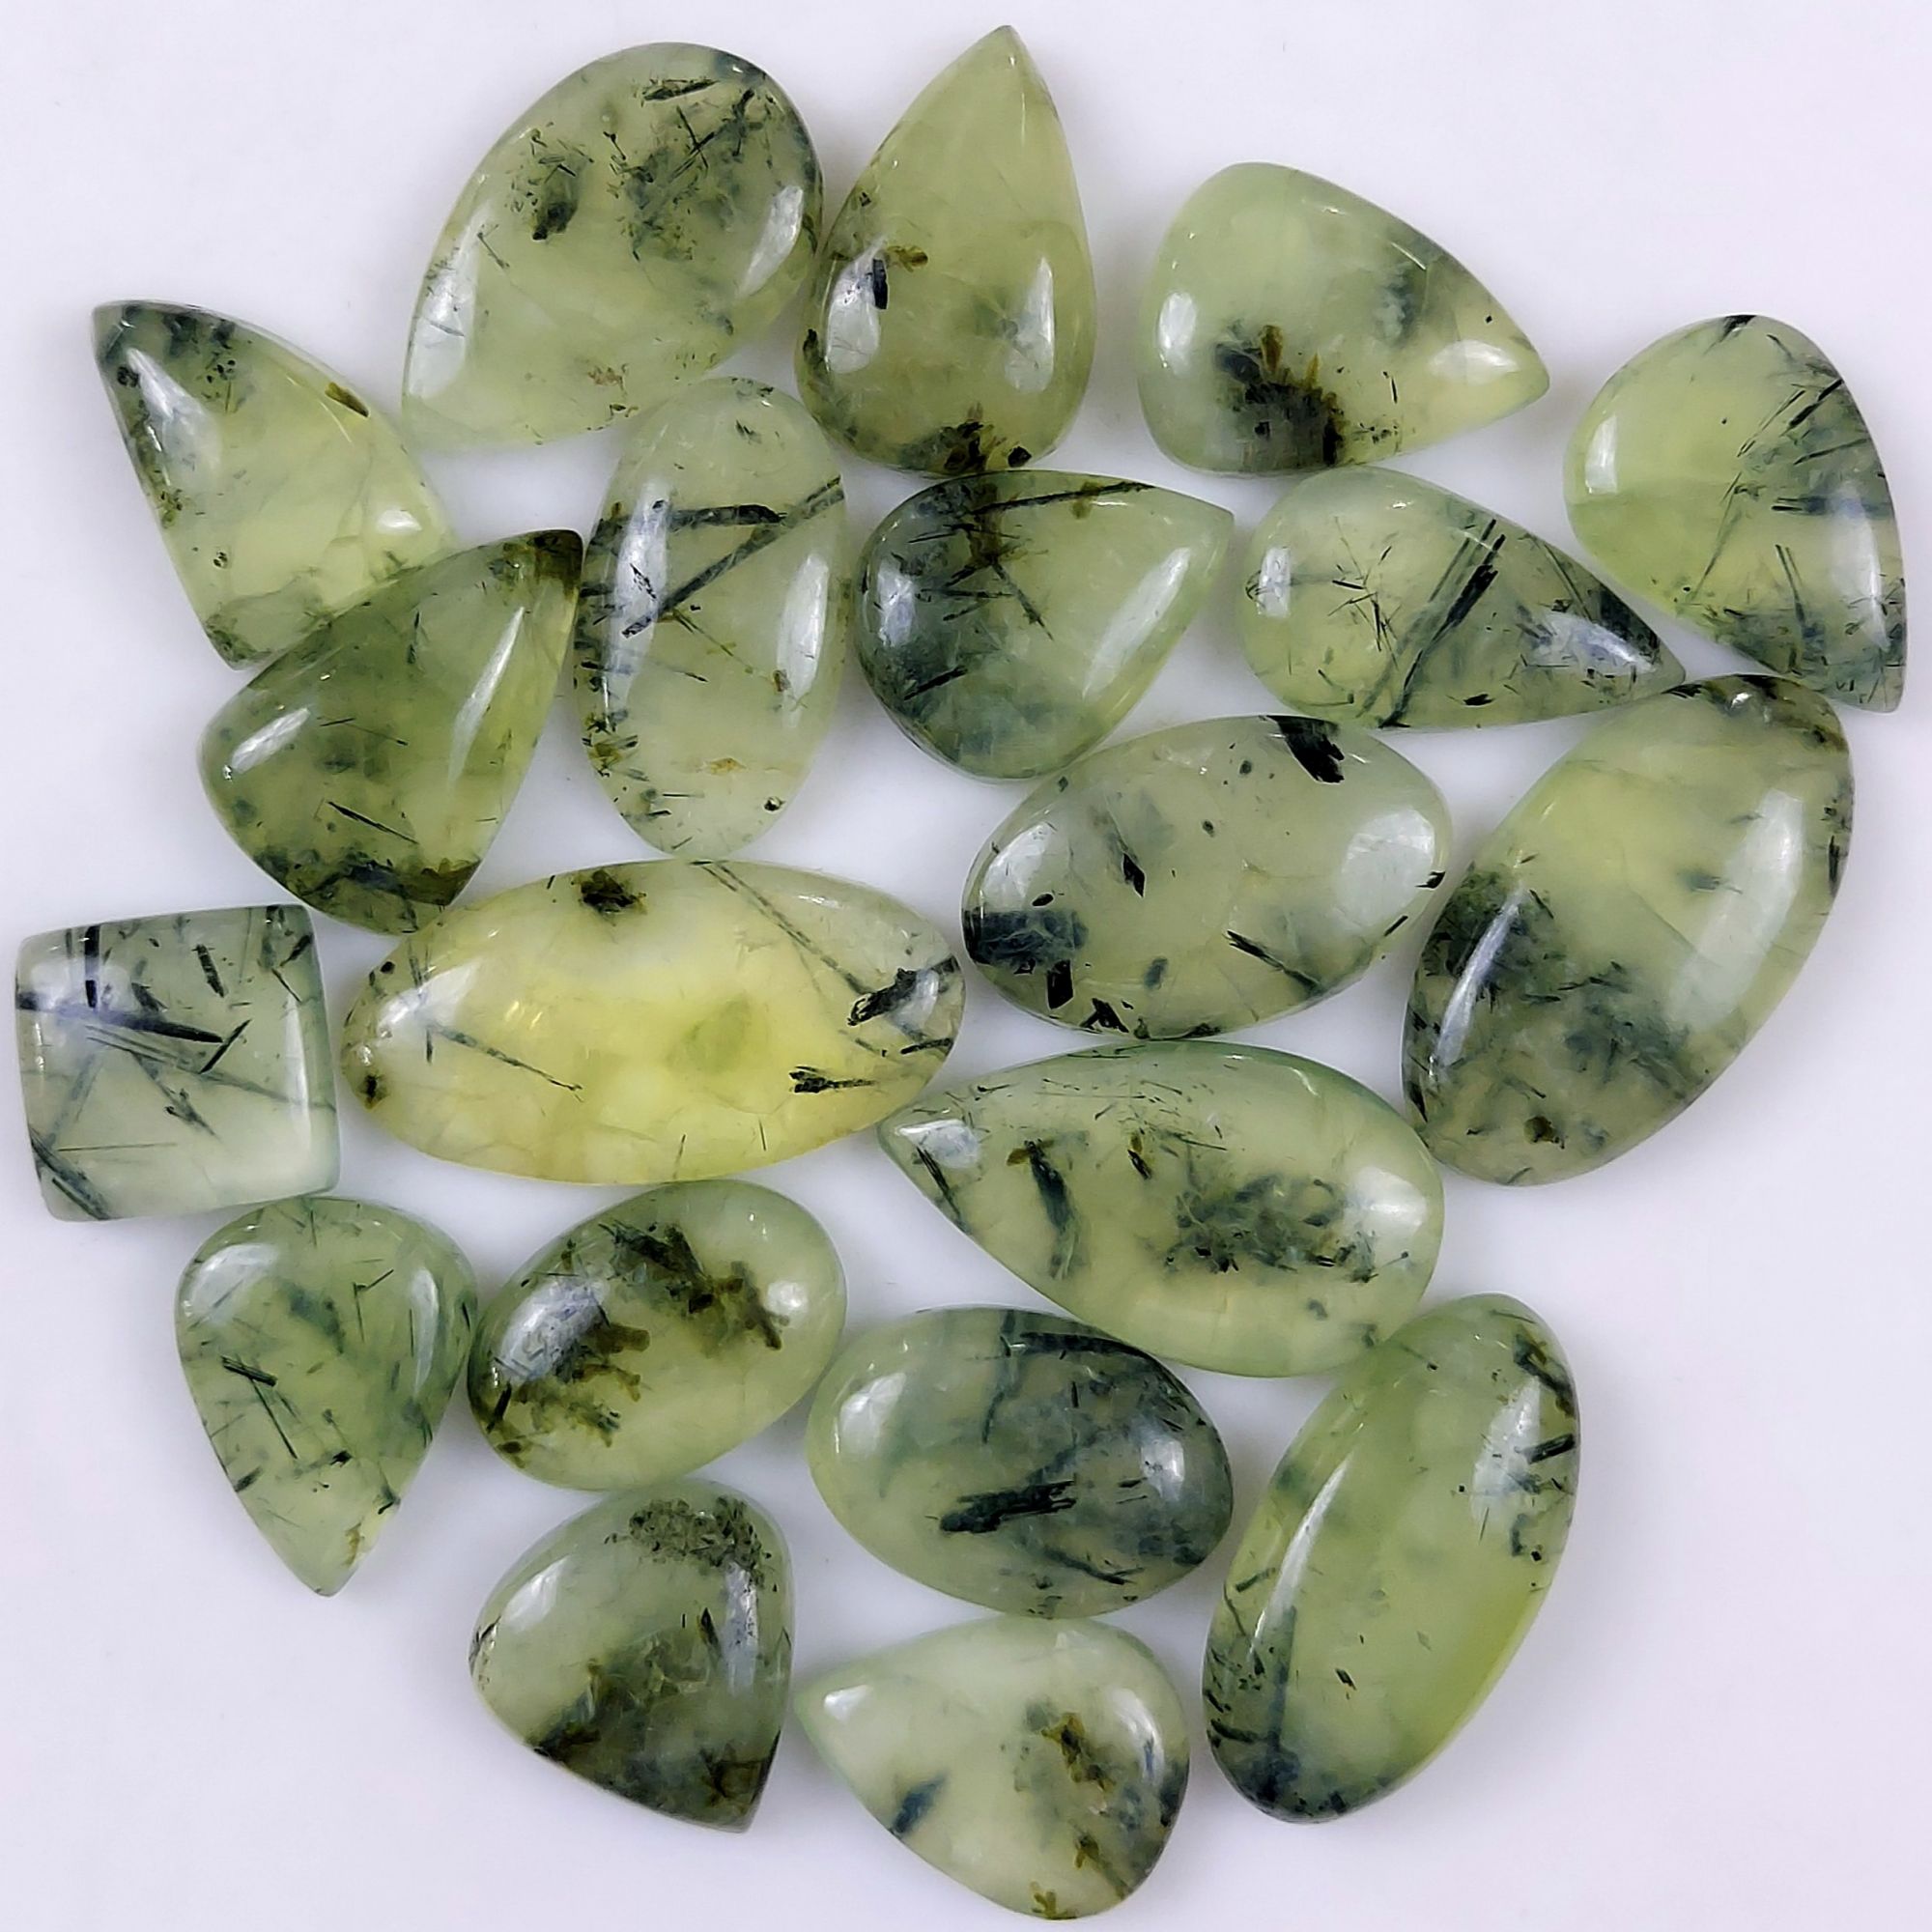 20Pcs 626Cts Natural Green Prehnite Loose Cabochon Gemstone Lot For Jewelry Making  35x17 19x19mm#1231